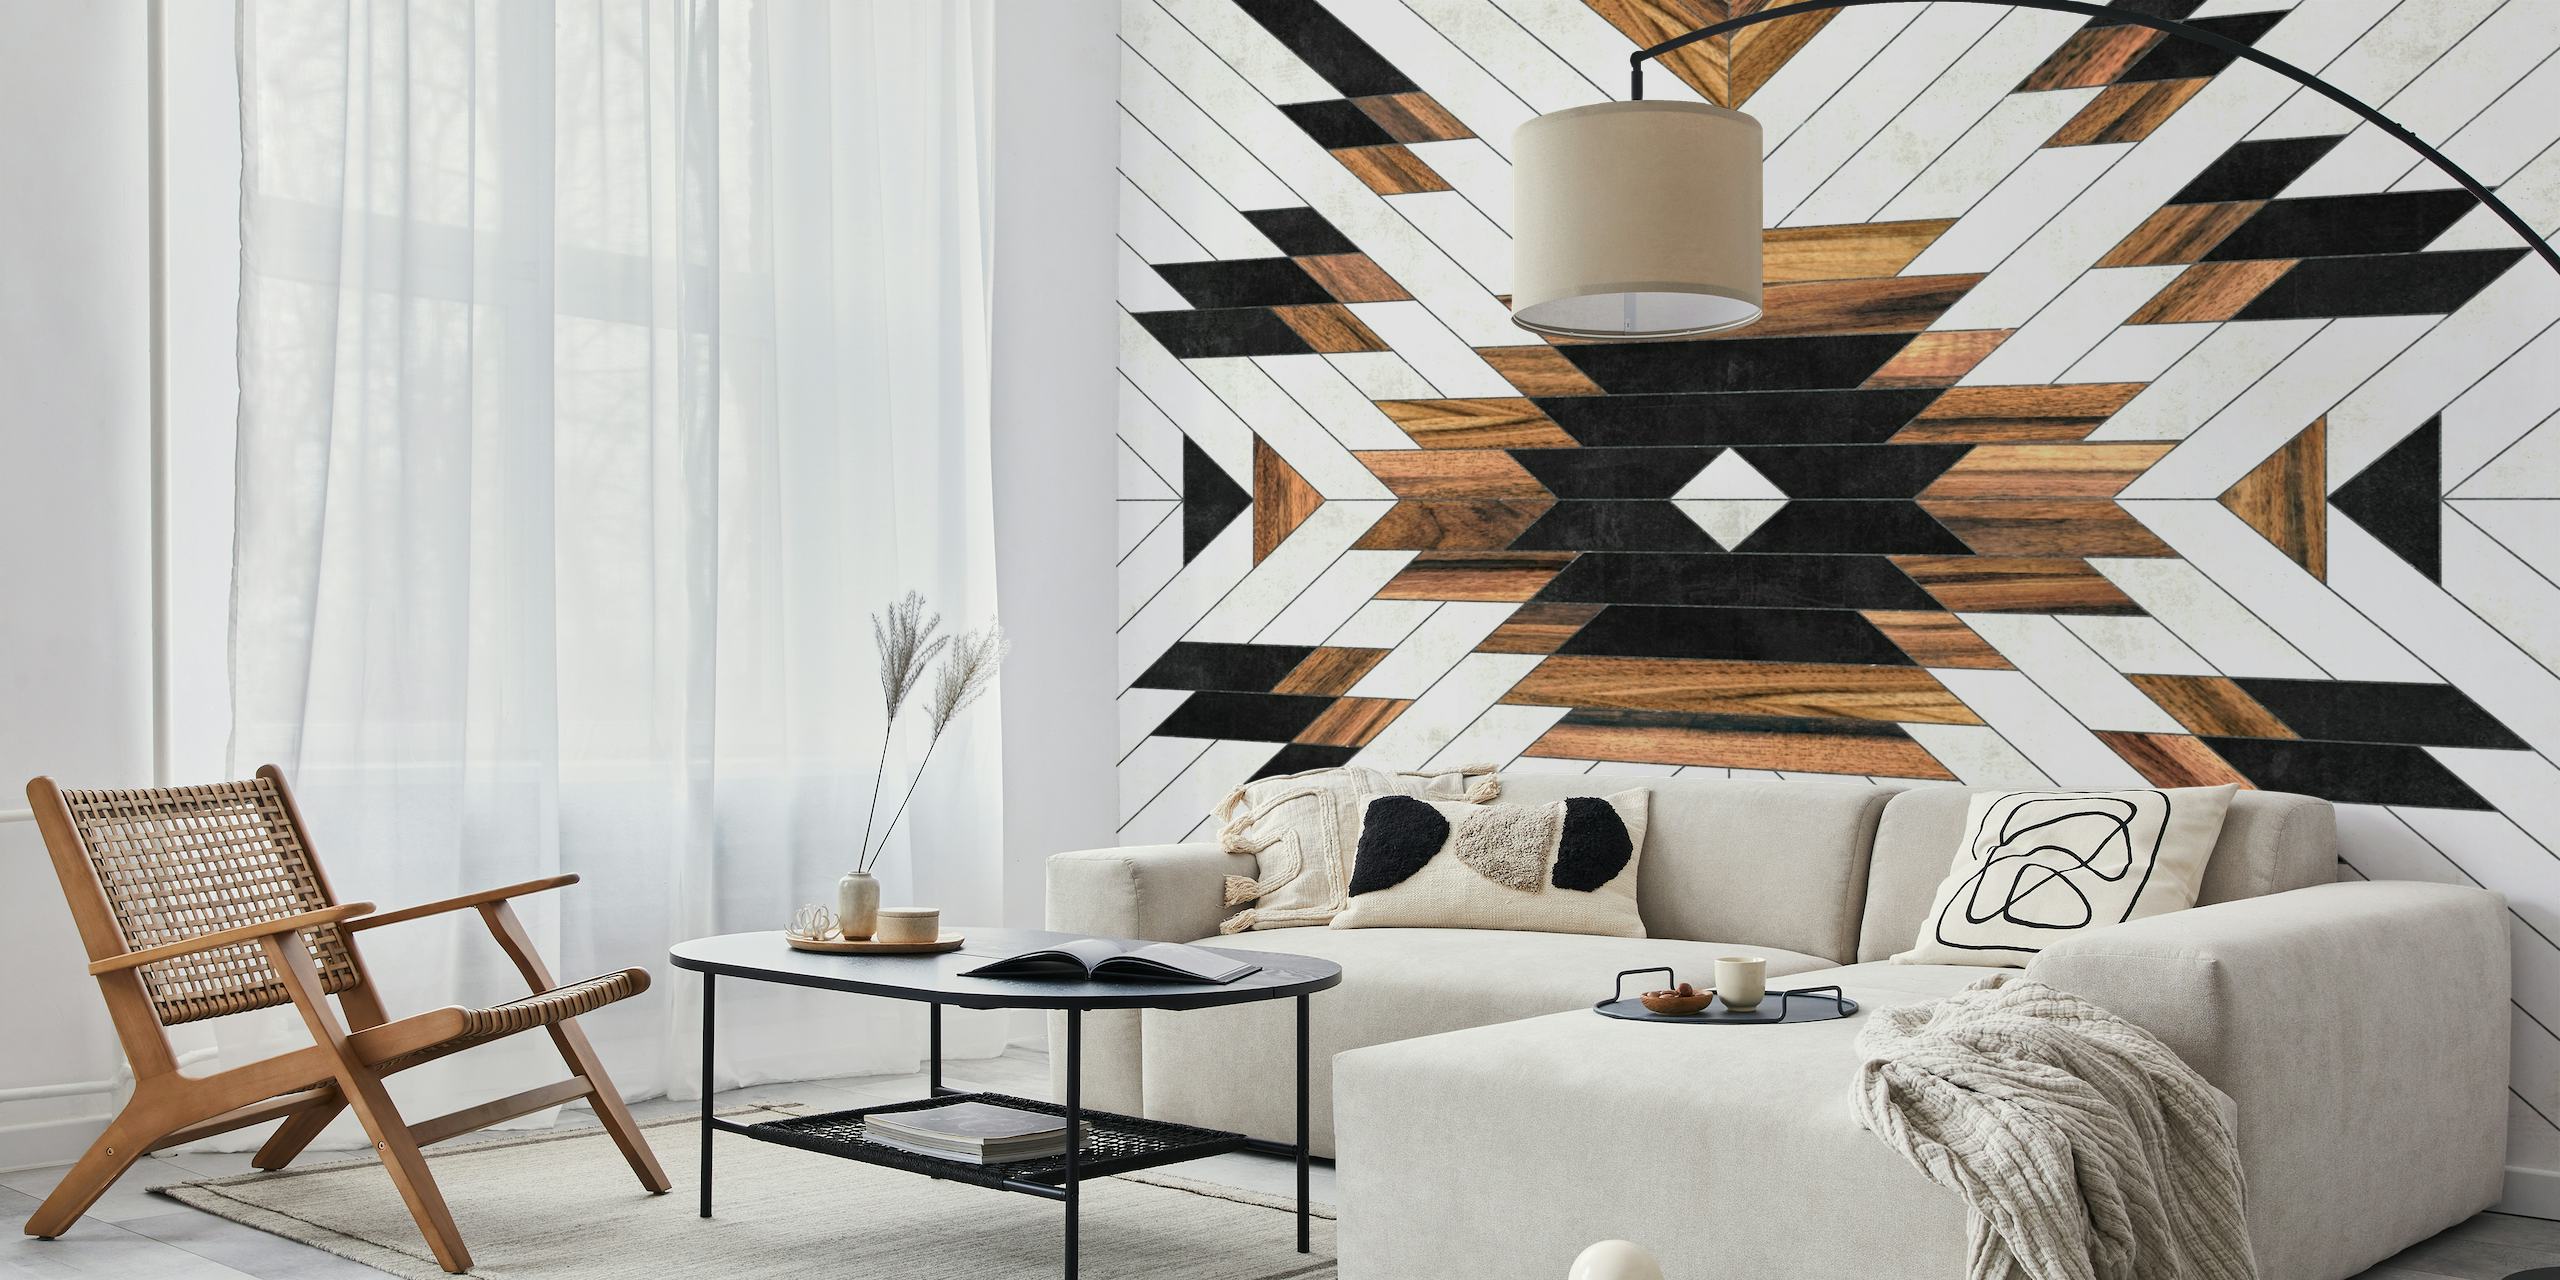 Urban tribal geometric pattern wall mural with black, white, and wood textures